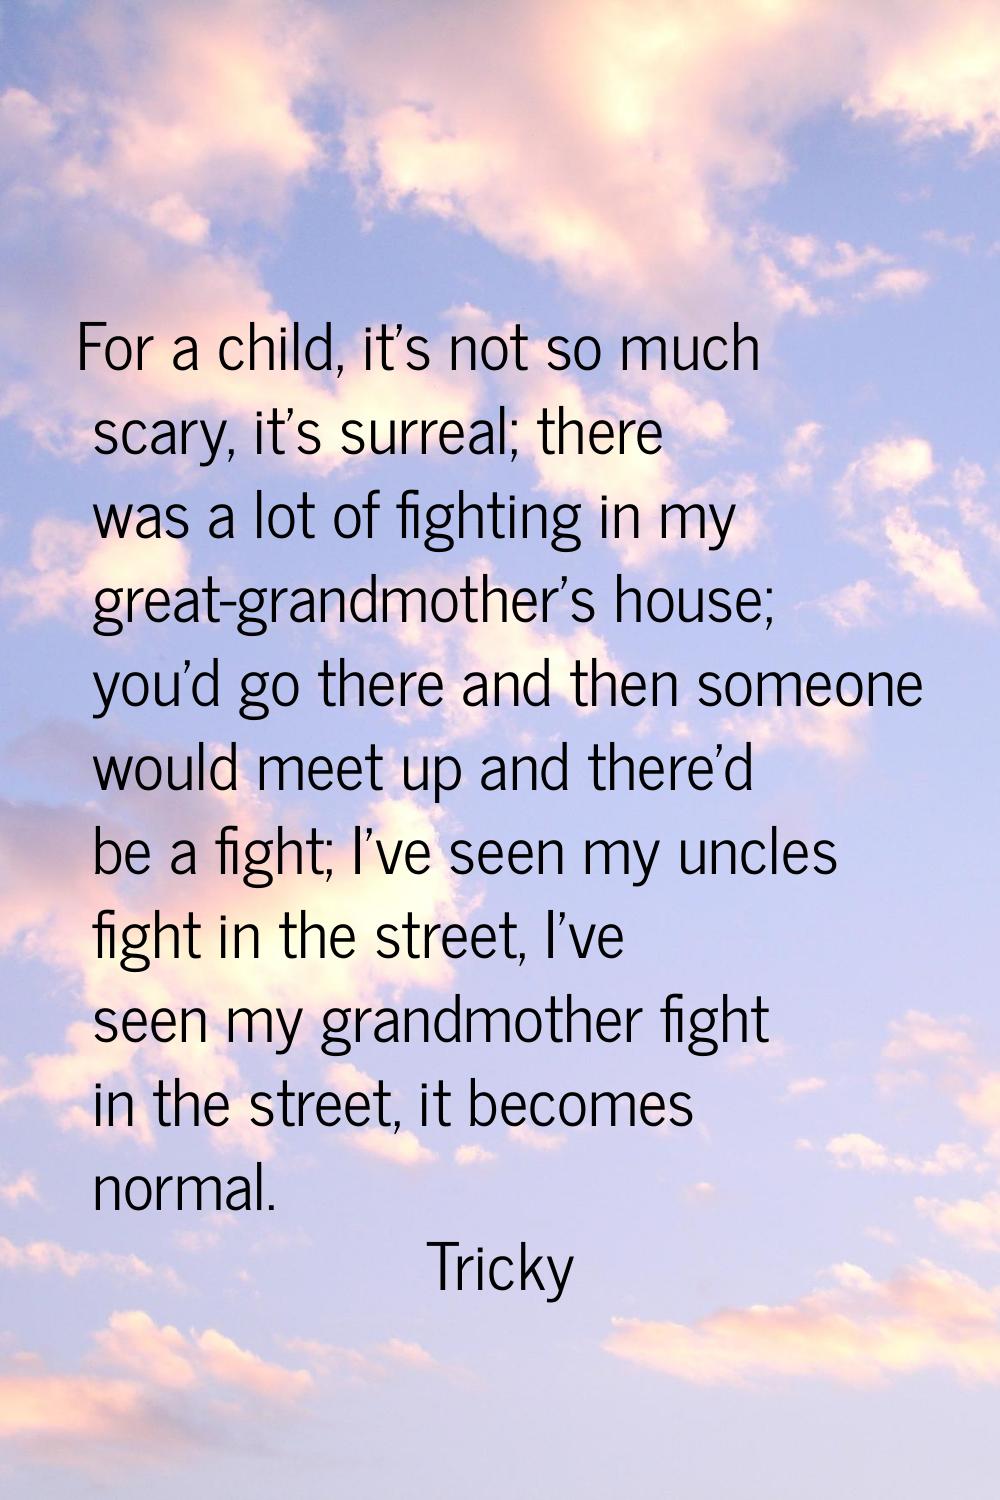 For a child, it's not so much scary, it's surreal; there was a lot of fighting in my great-grandmot